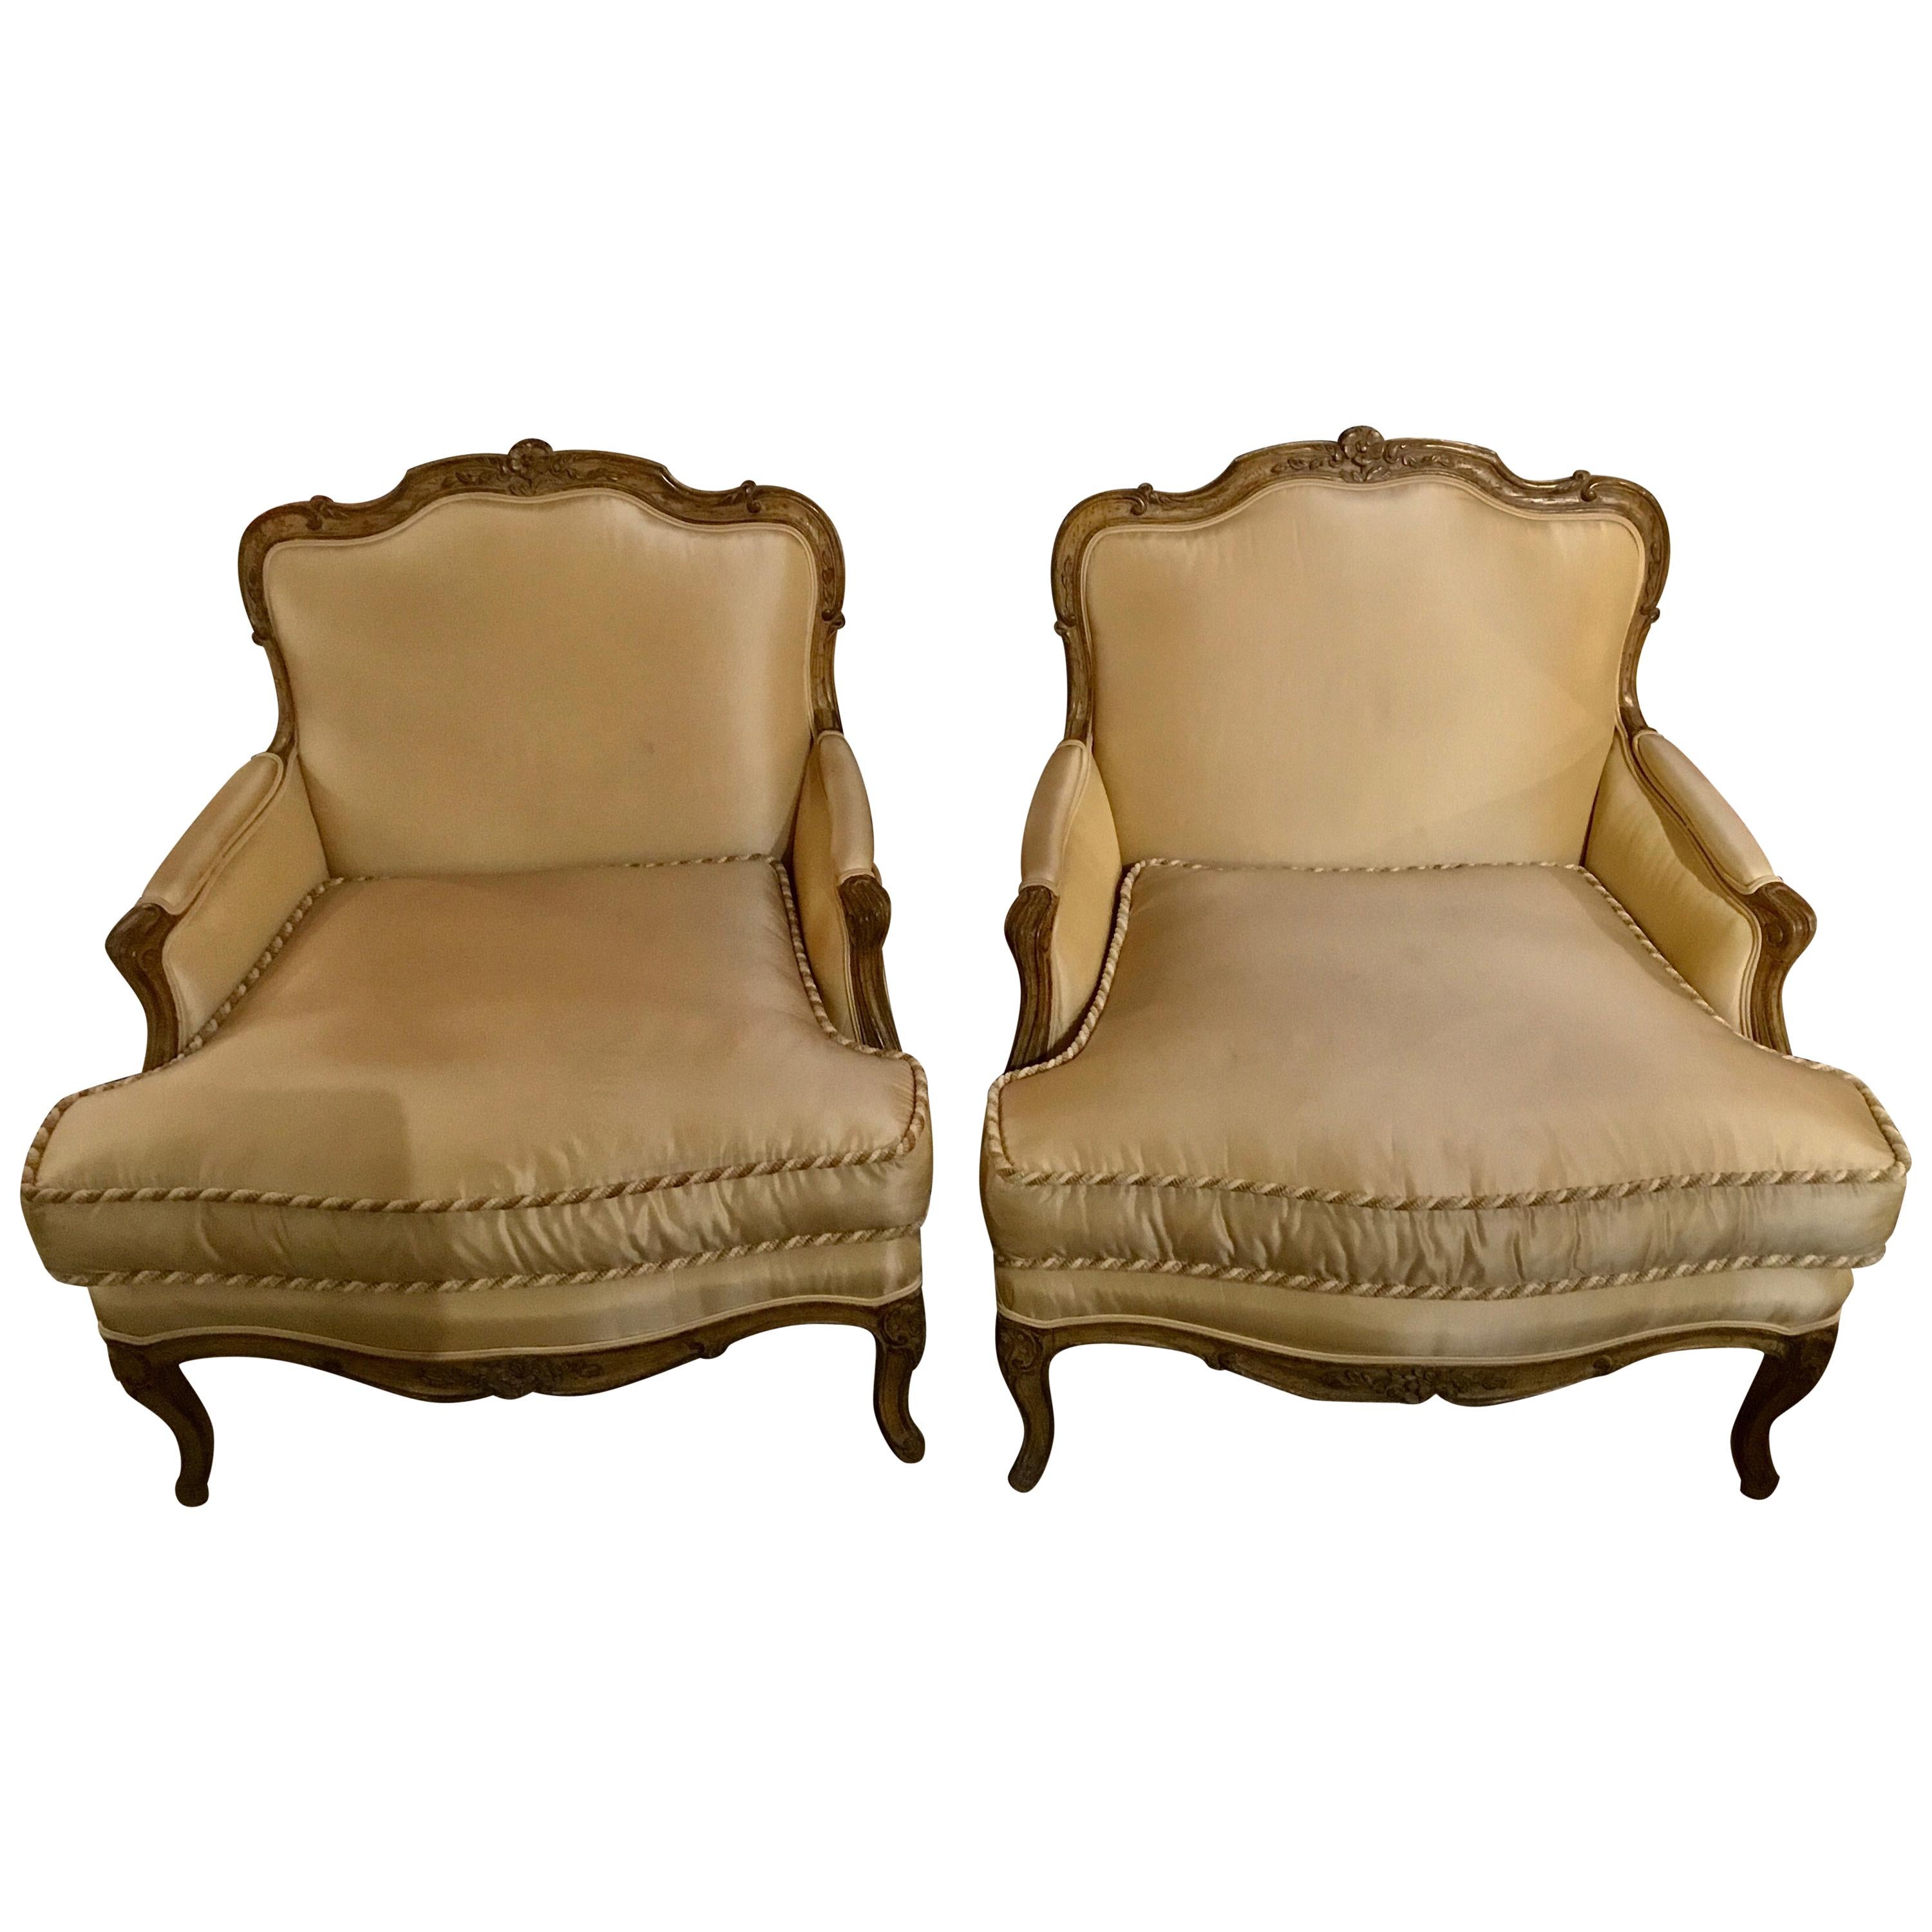 Pair of Louis XV-Style Painted and Carved Bergere Chairs, 20th Century